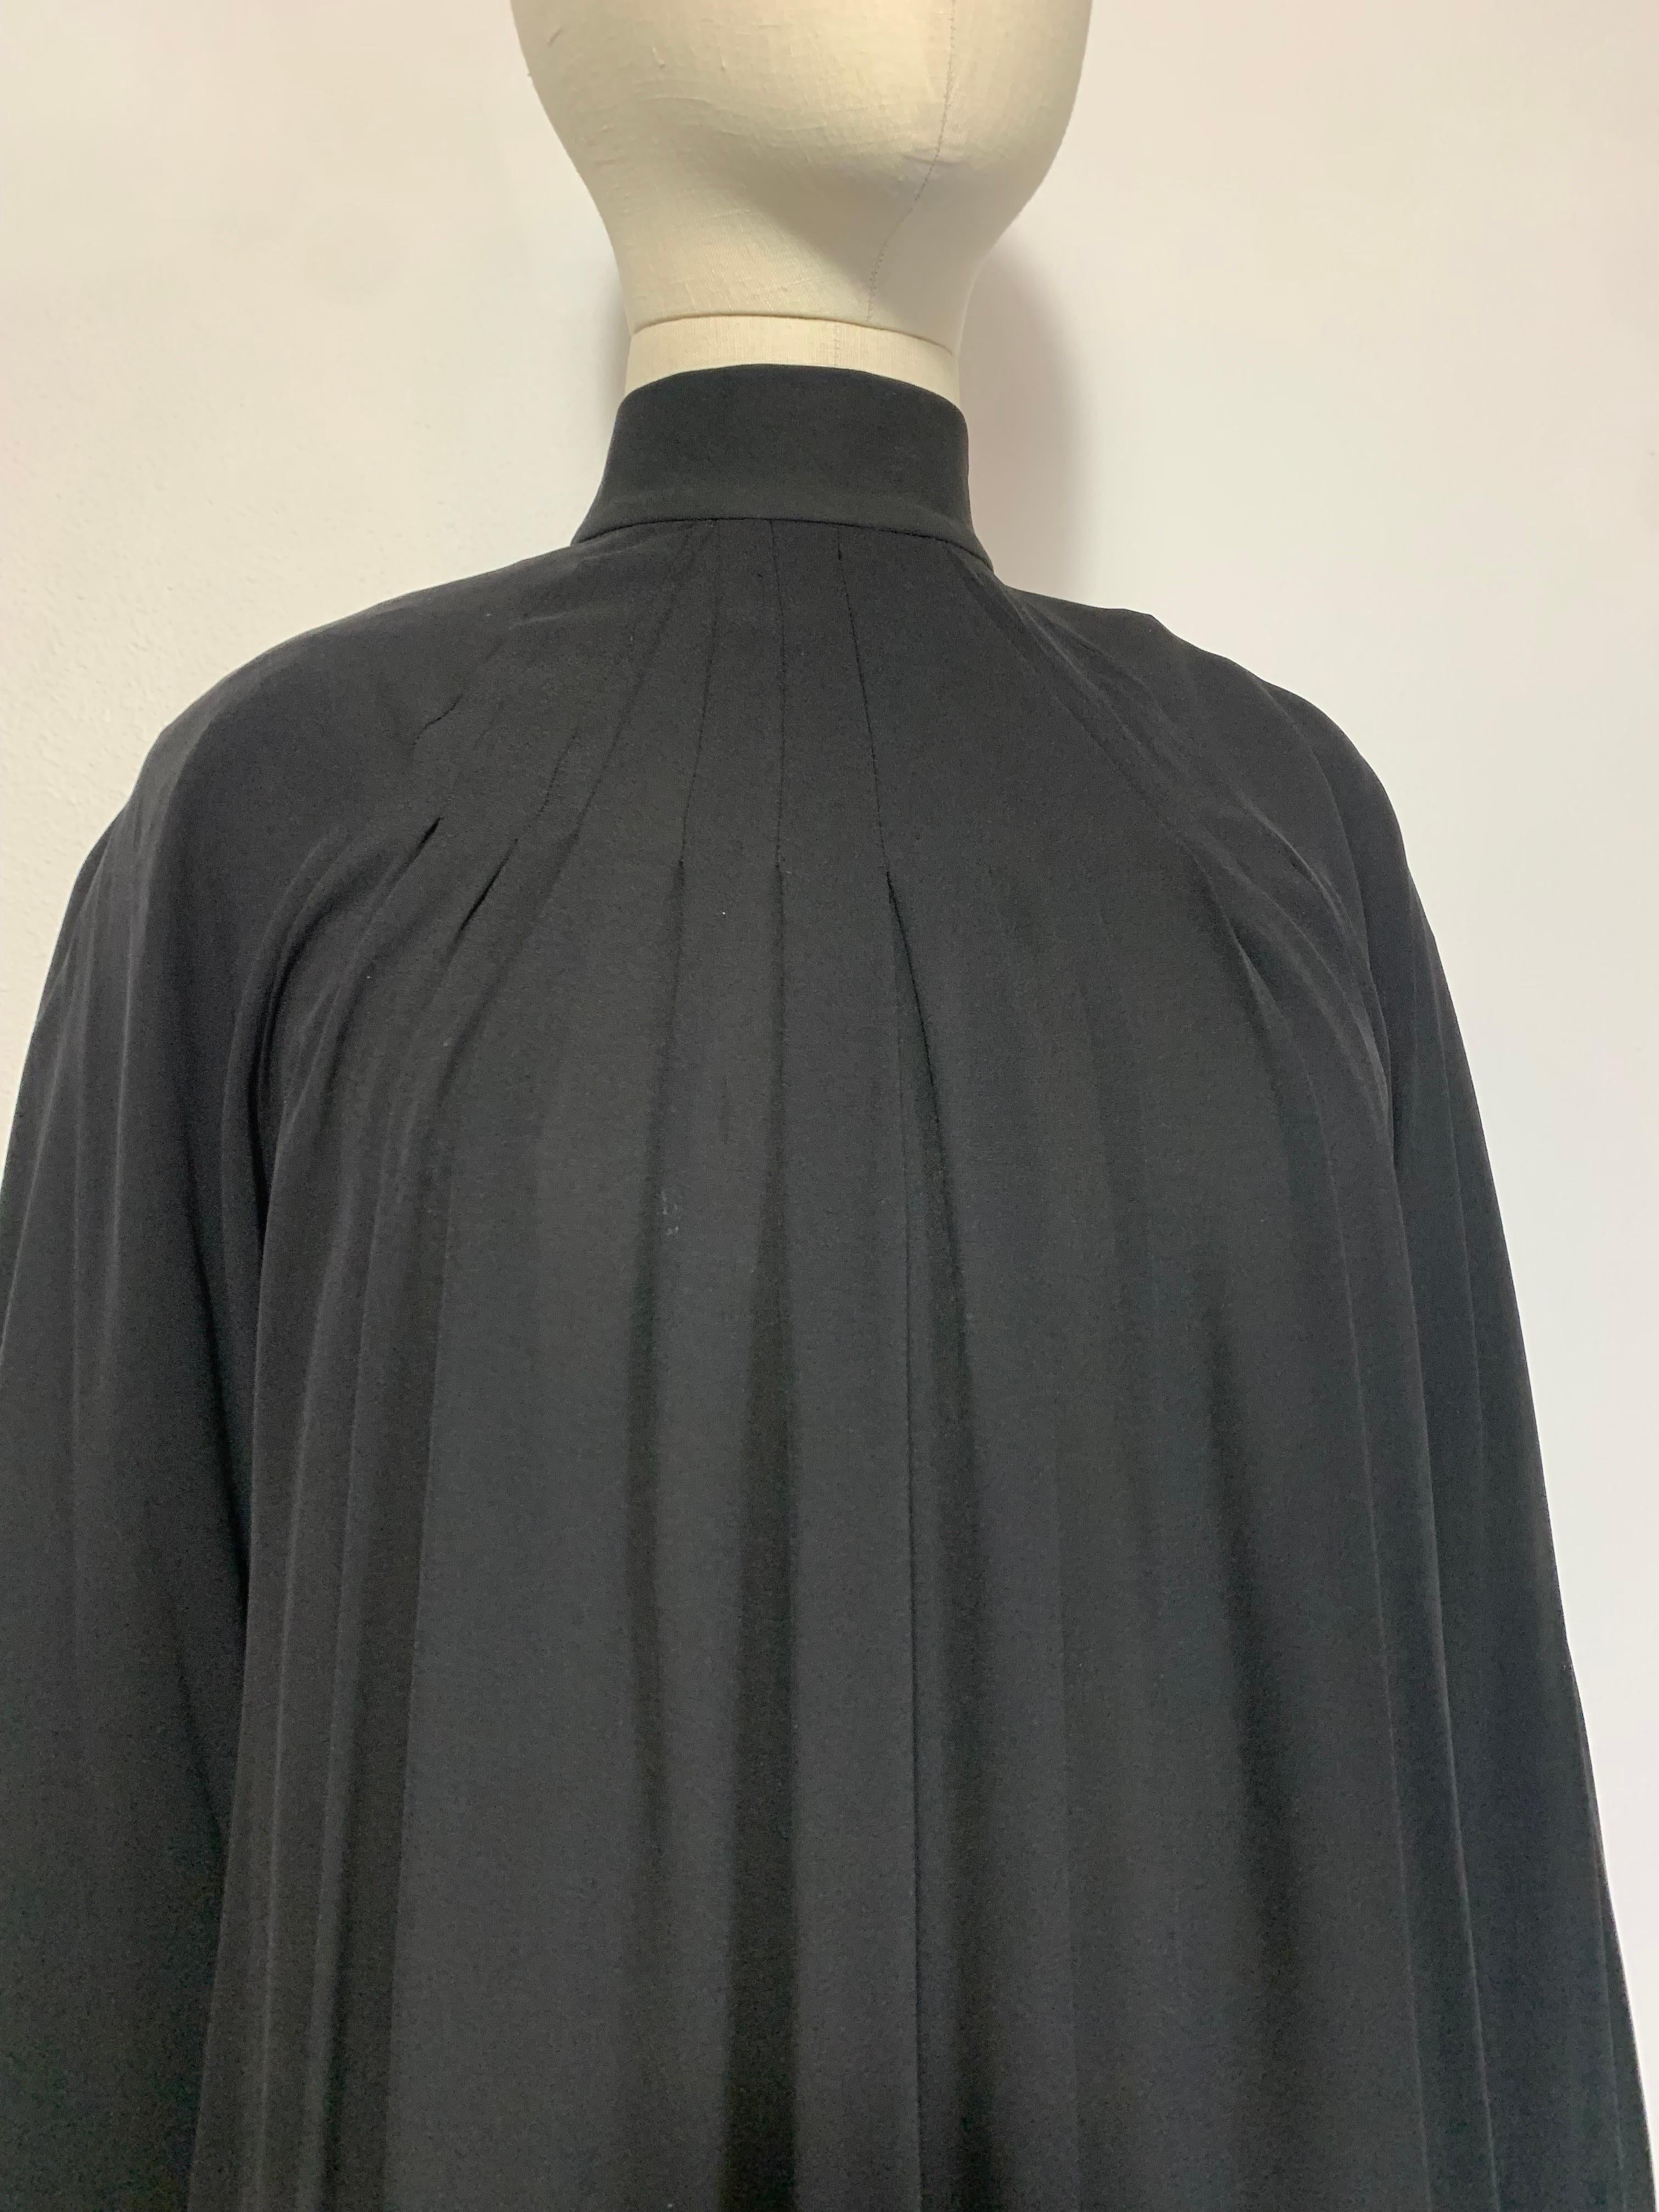 Andrew Gn Black Silk Crepe Monastic-Styled Maxi Dress w Full Pleats & High Neck  For Sale 9